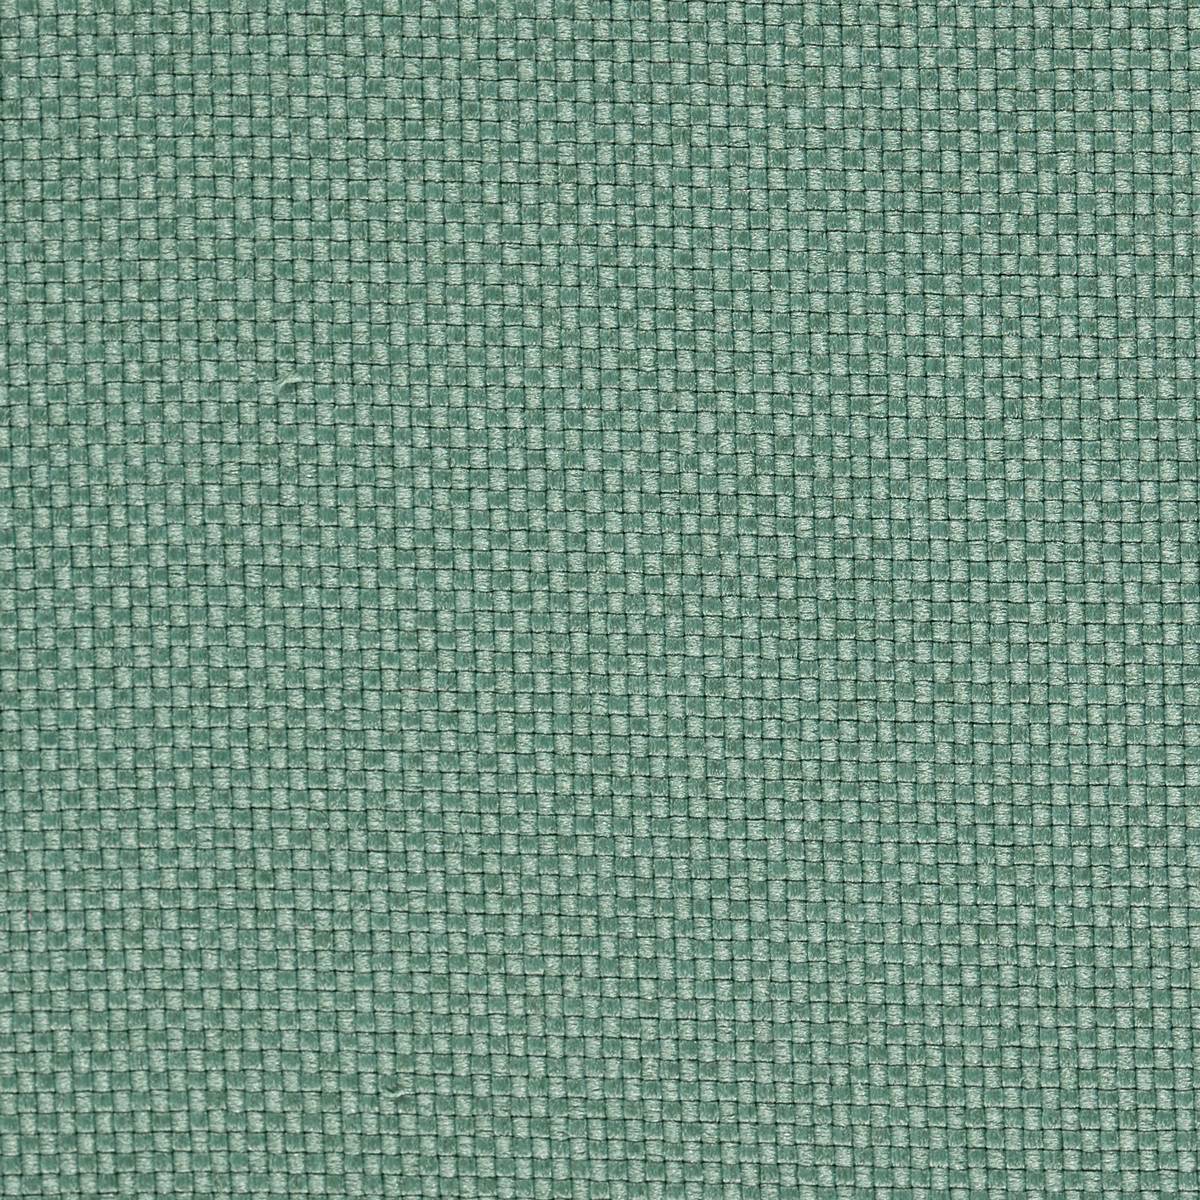 Lepton Lily Pad Fabric by Harlequin